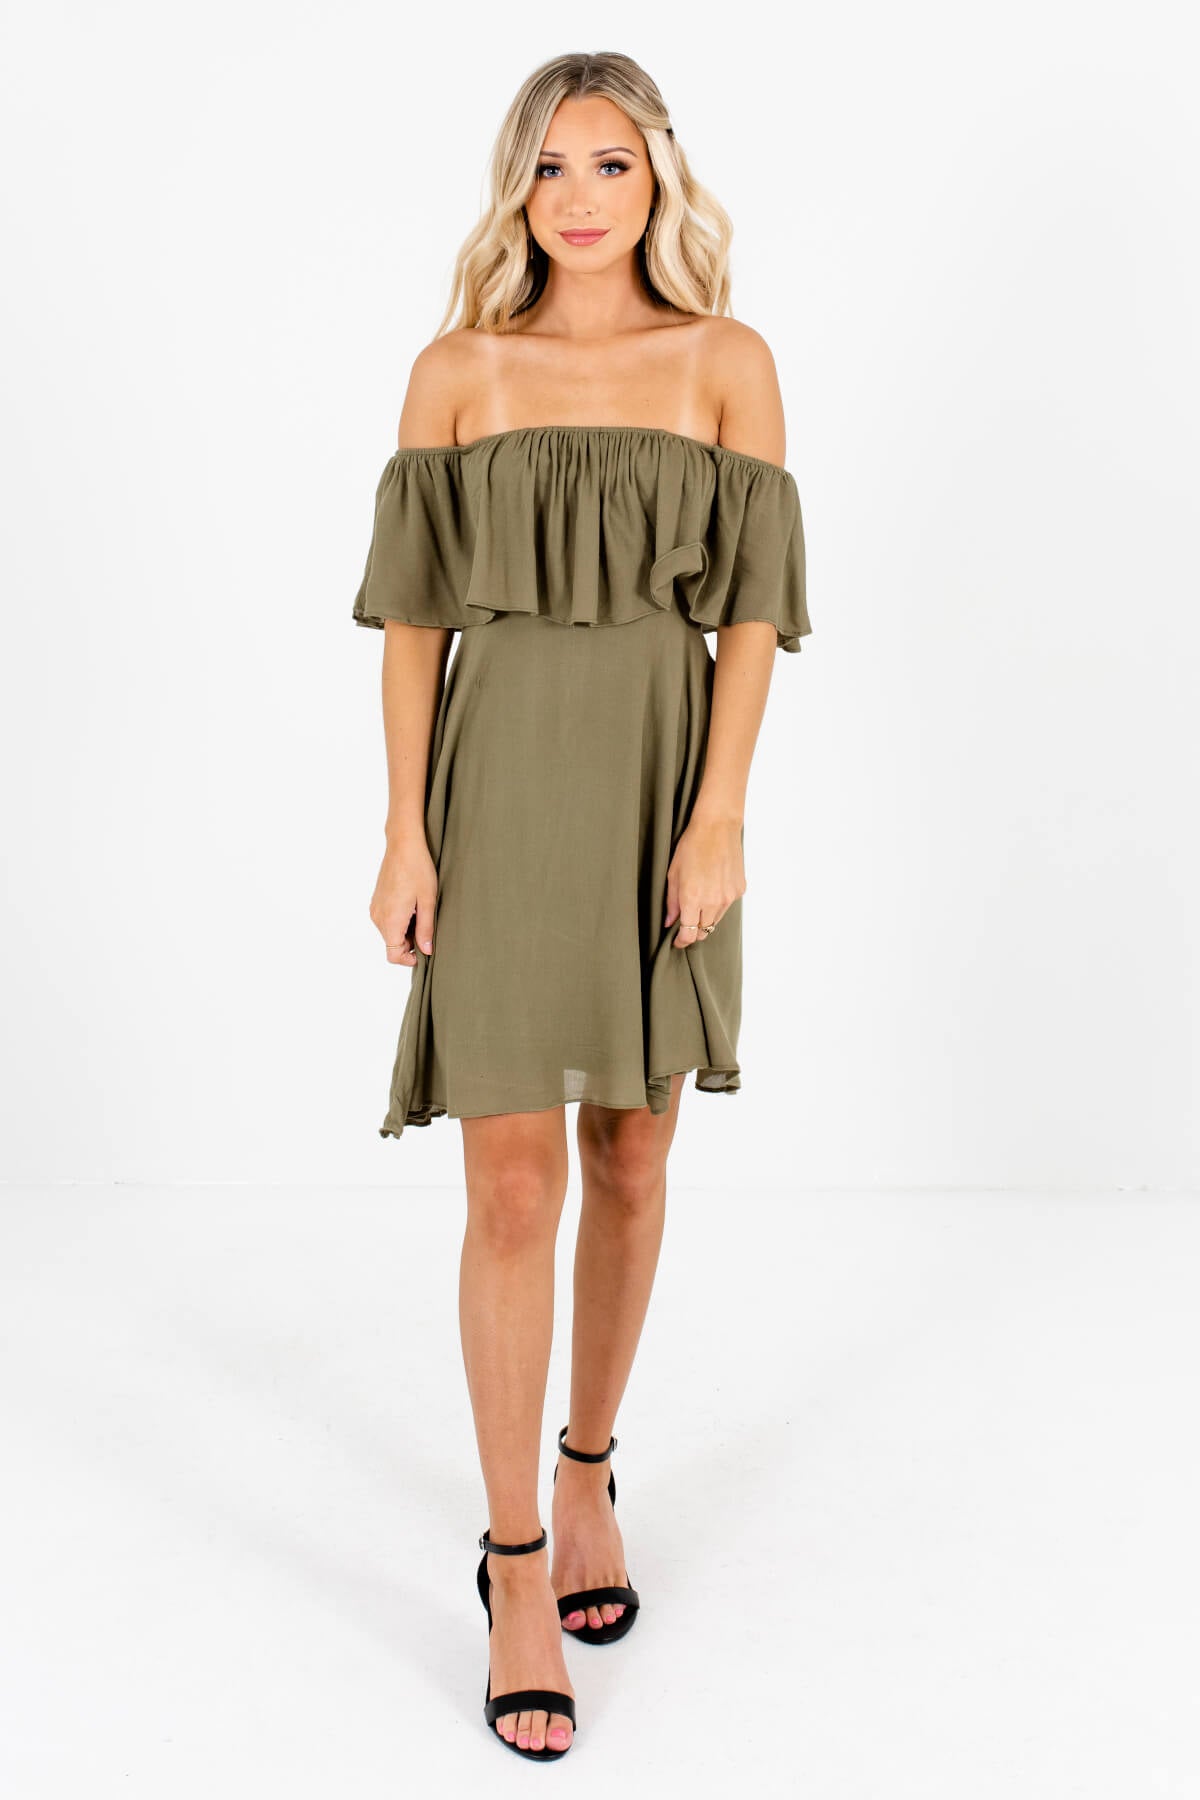 Olive Green Date Night Boutique Outfits for Women